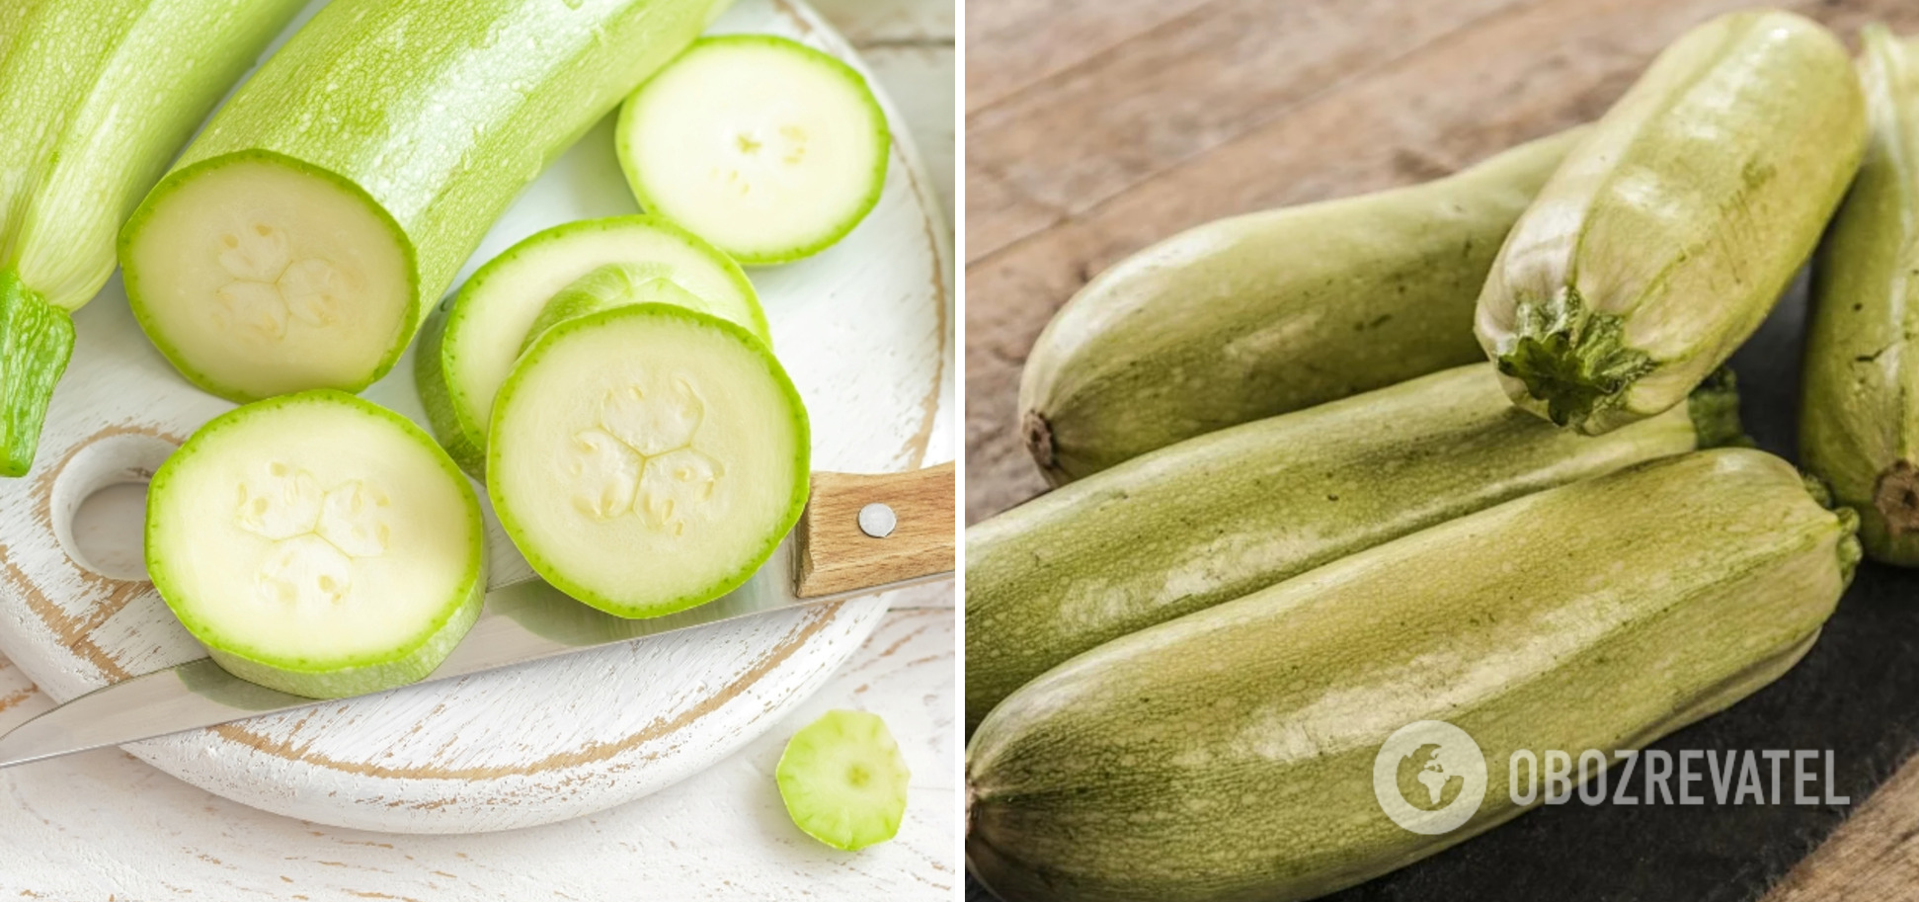 How to properly freeze zucchini for winter